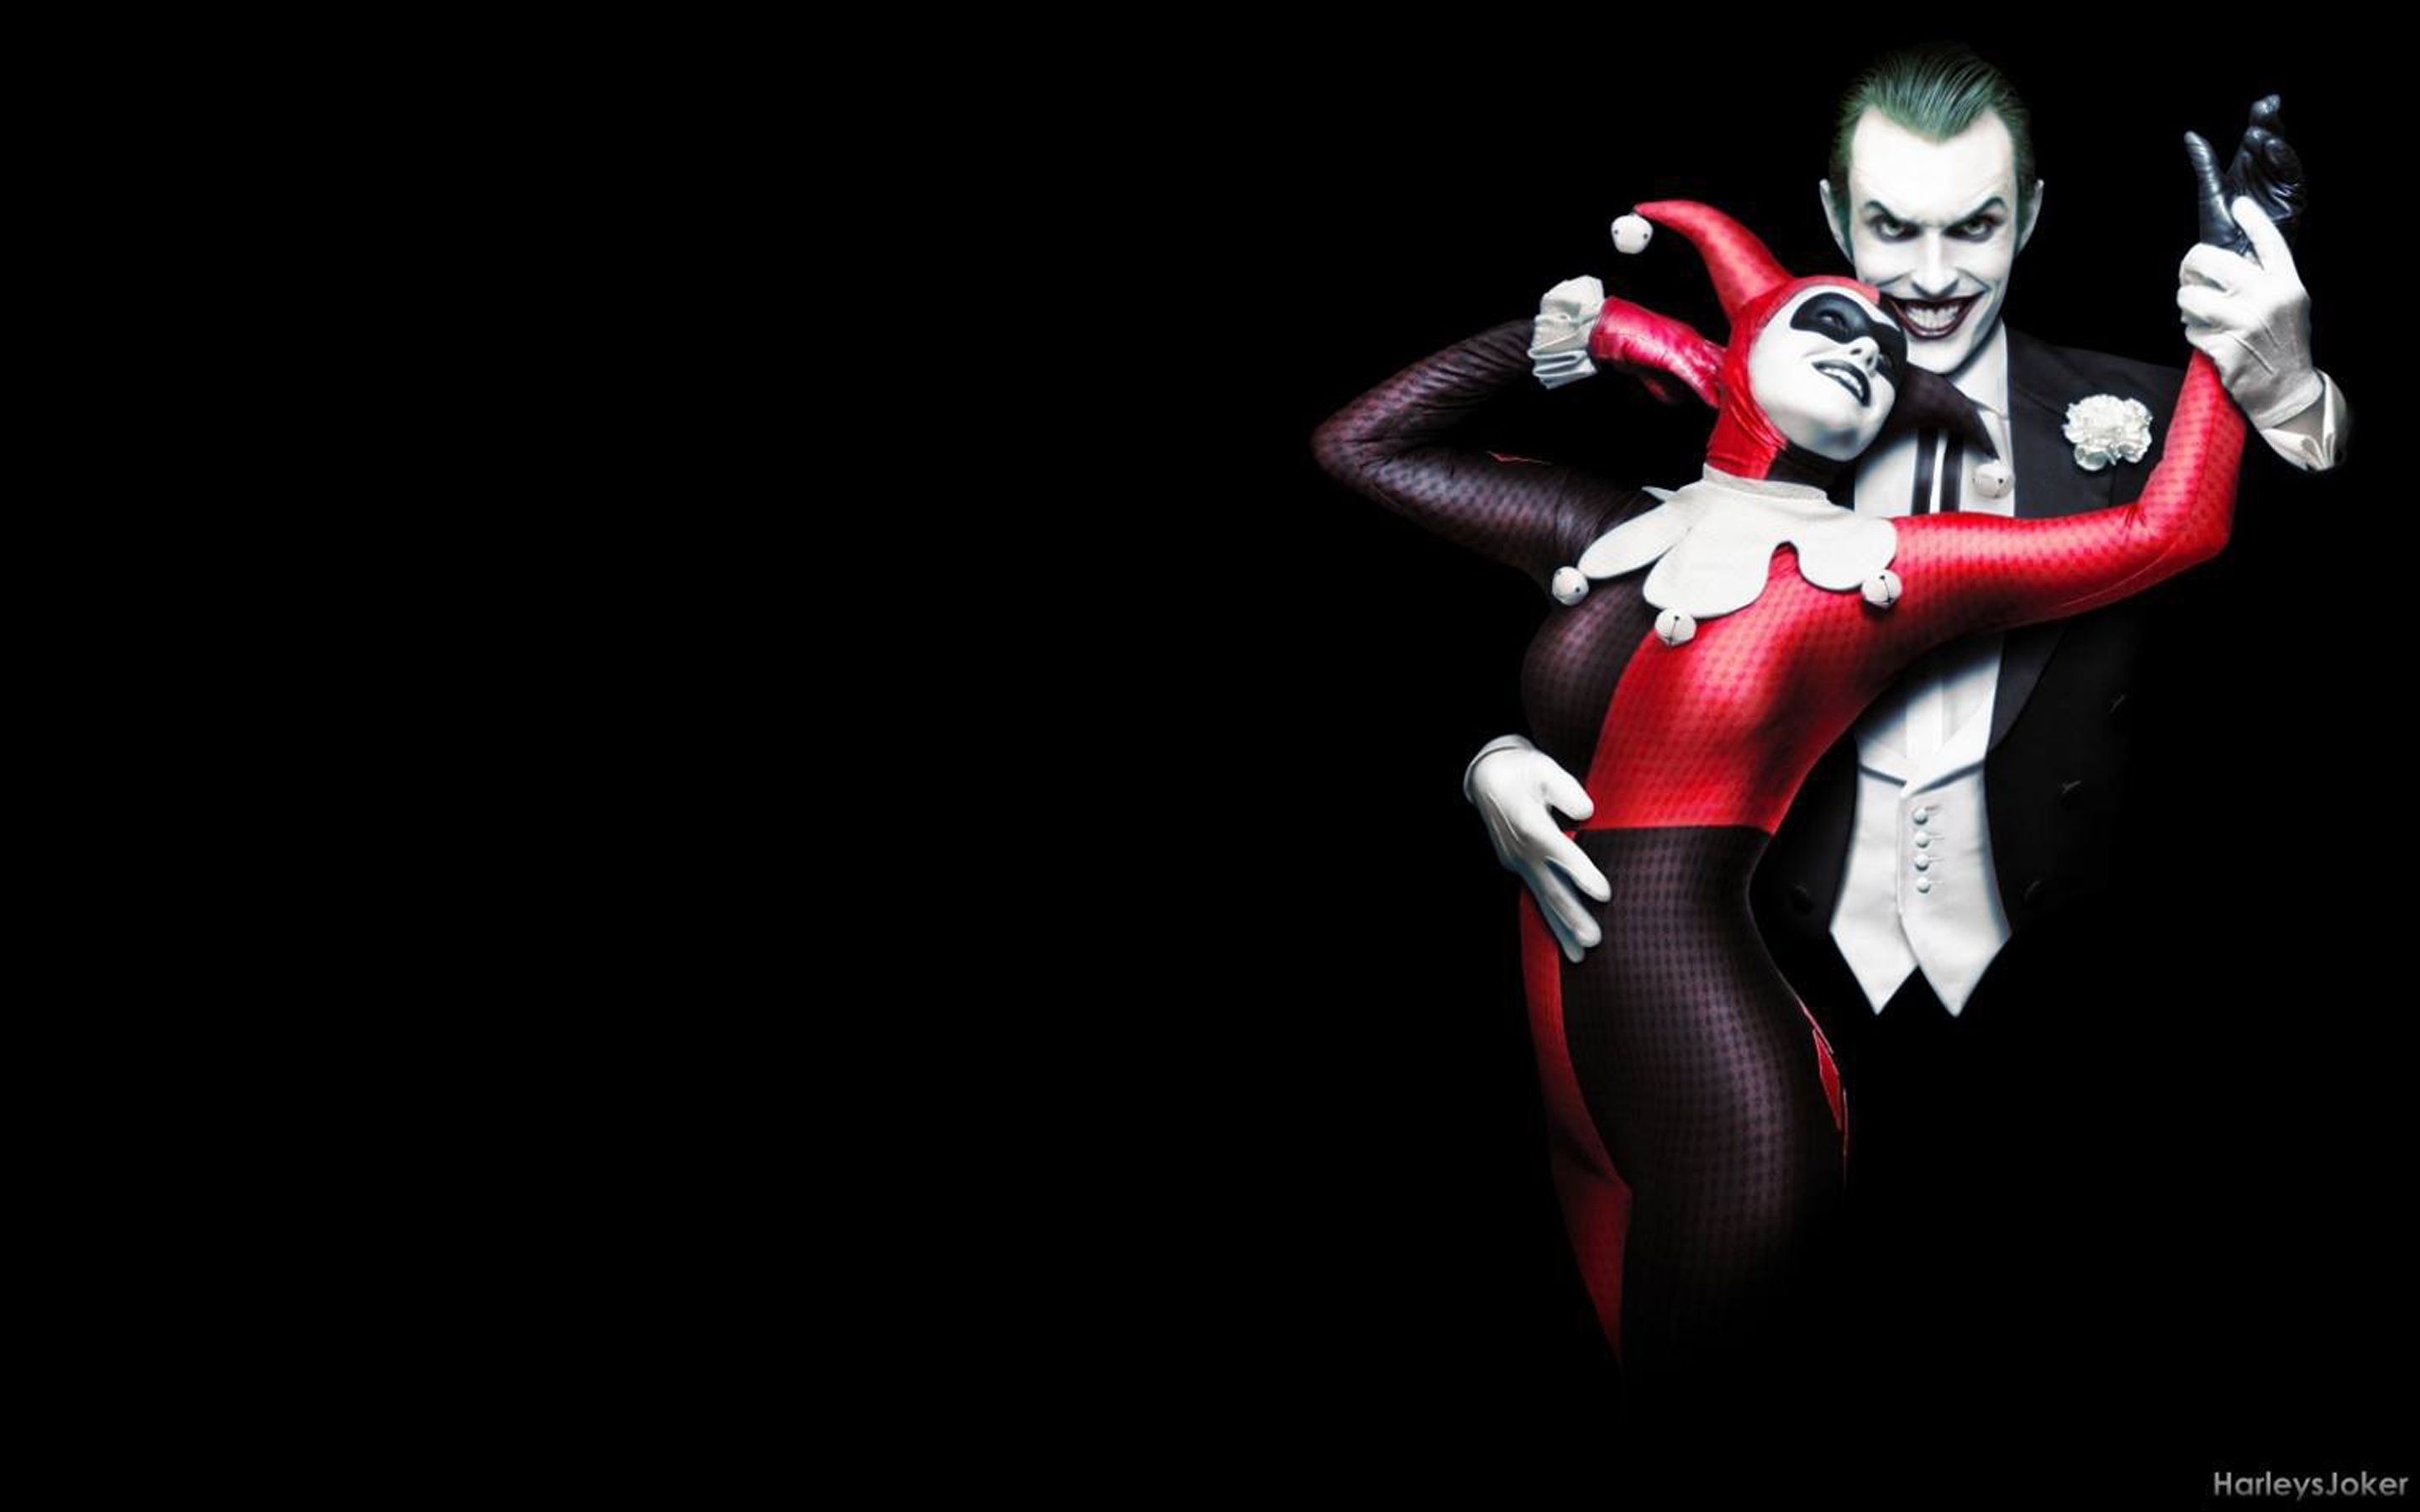 Joker And Harley Cosplay Of Alex Ross's Game With The Devil HD Desktop Background Free Download, Wallpaper13.com